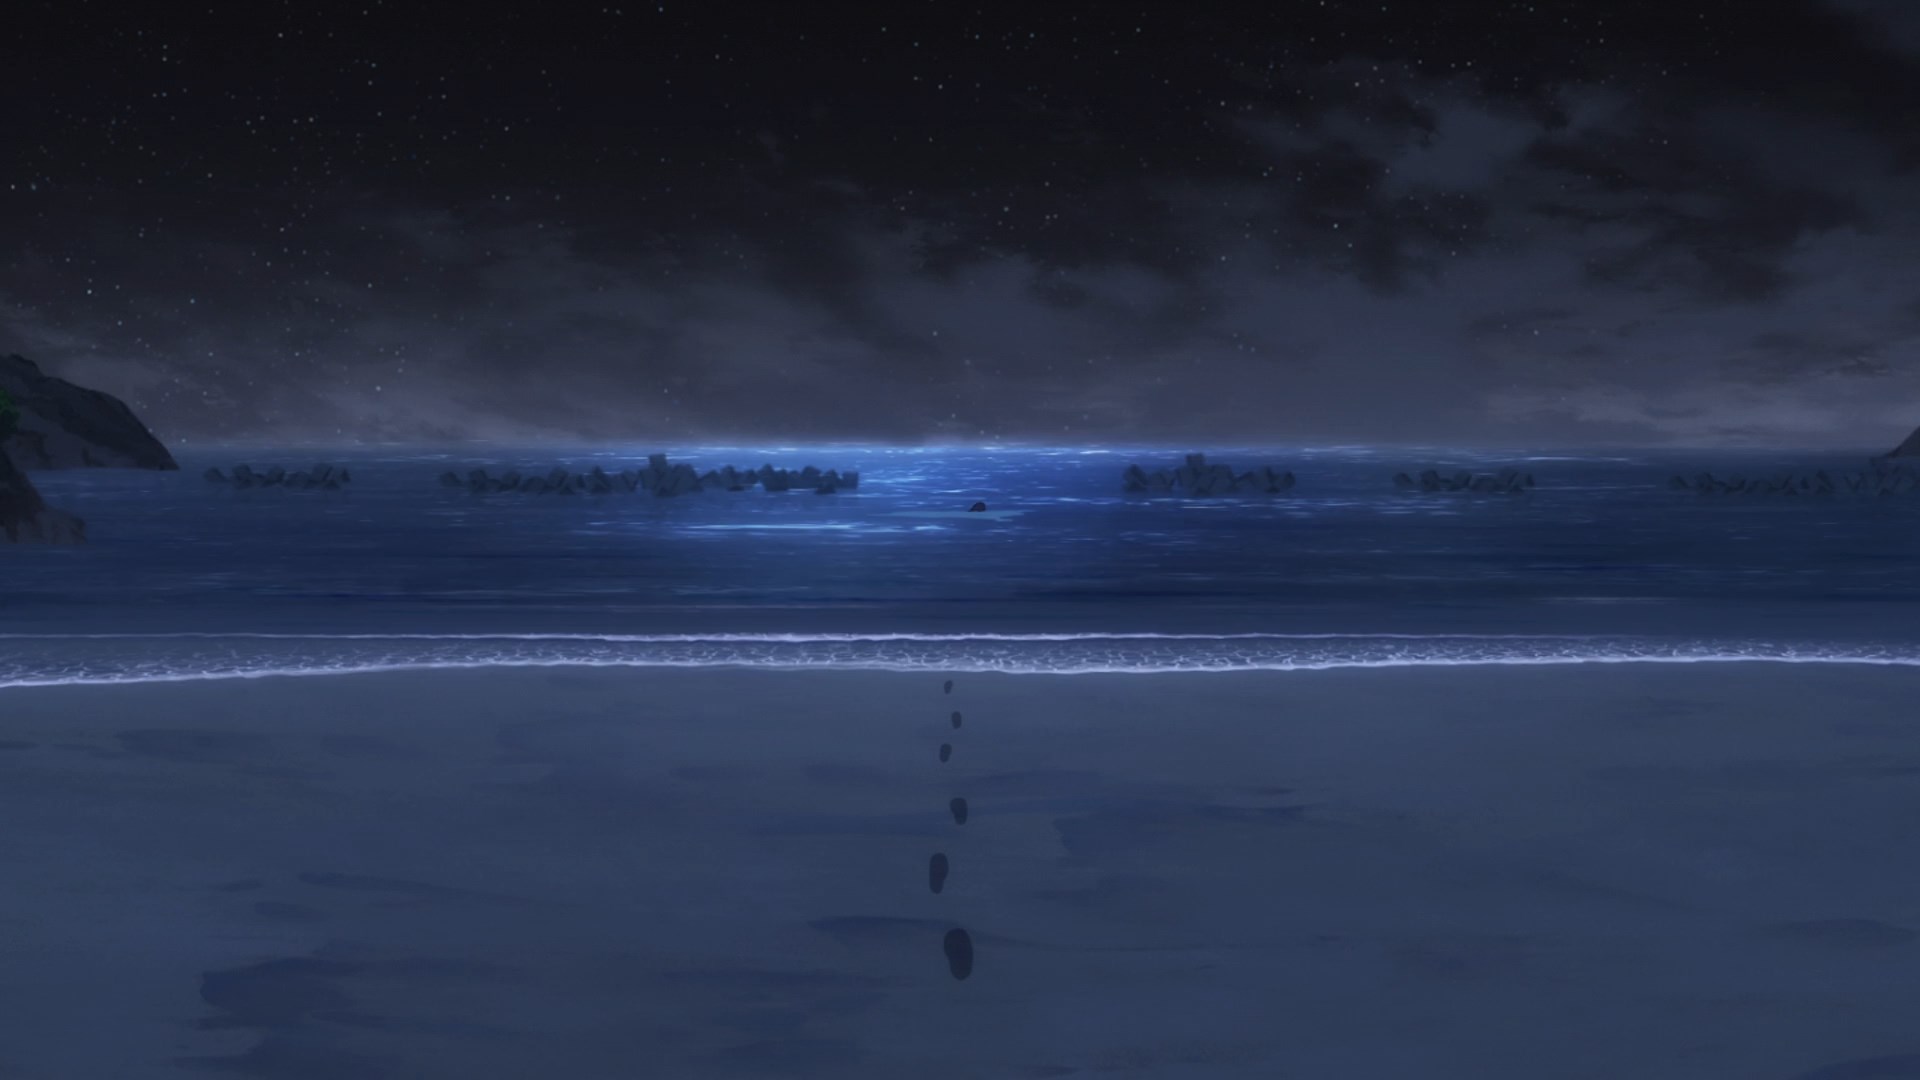 Anime Landscape: Darling in the Franxx Anime TOP 10 Backgrounds